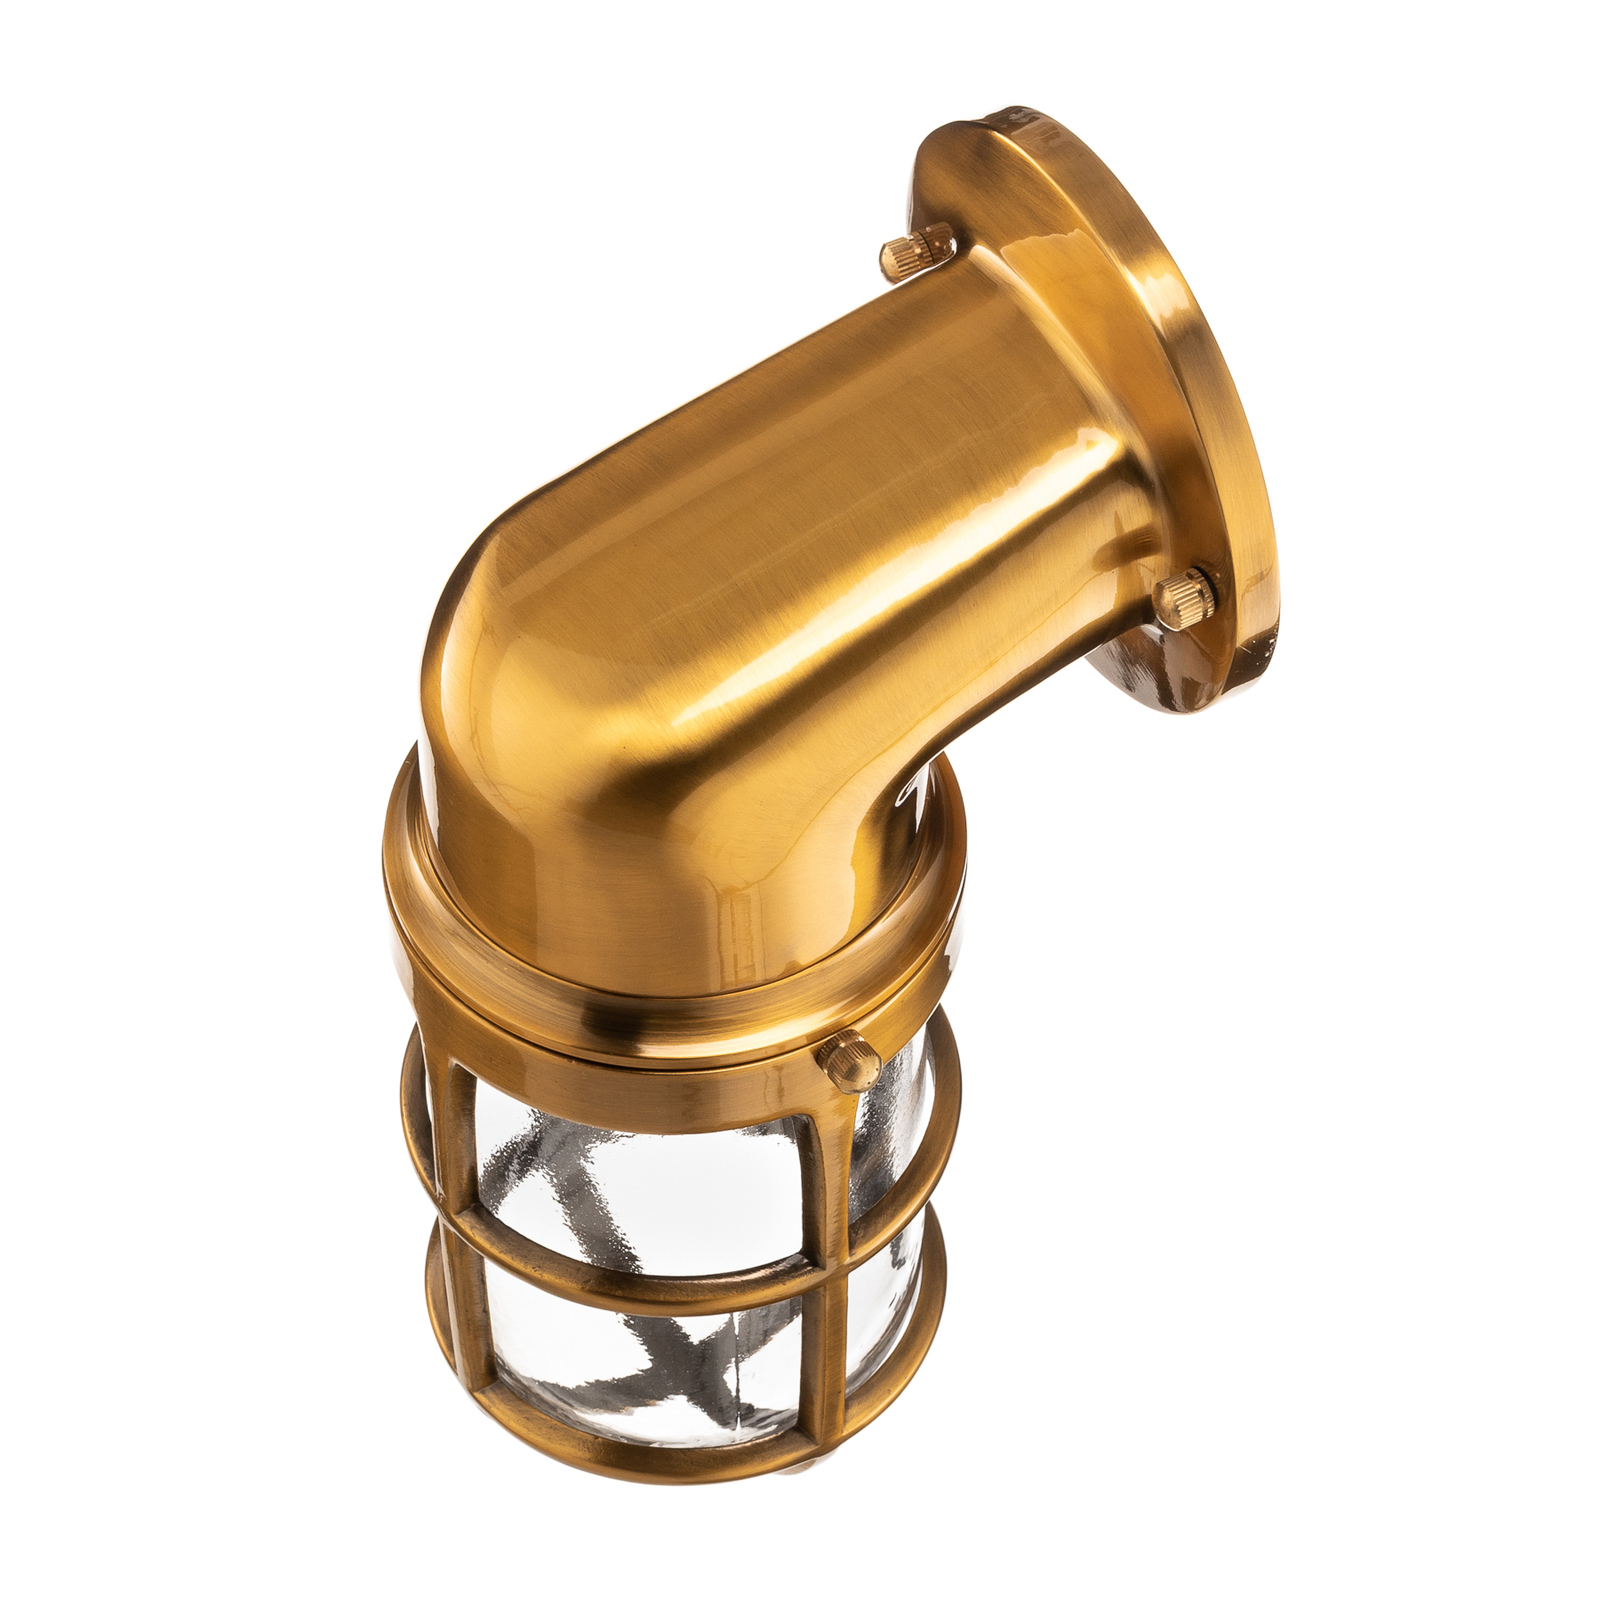 Dudley outdoor wall light, projecting at the bottom, brass